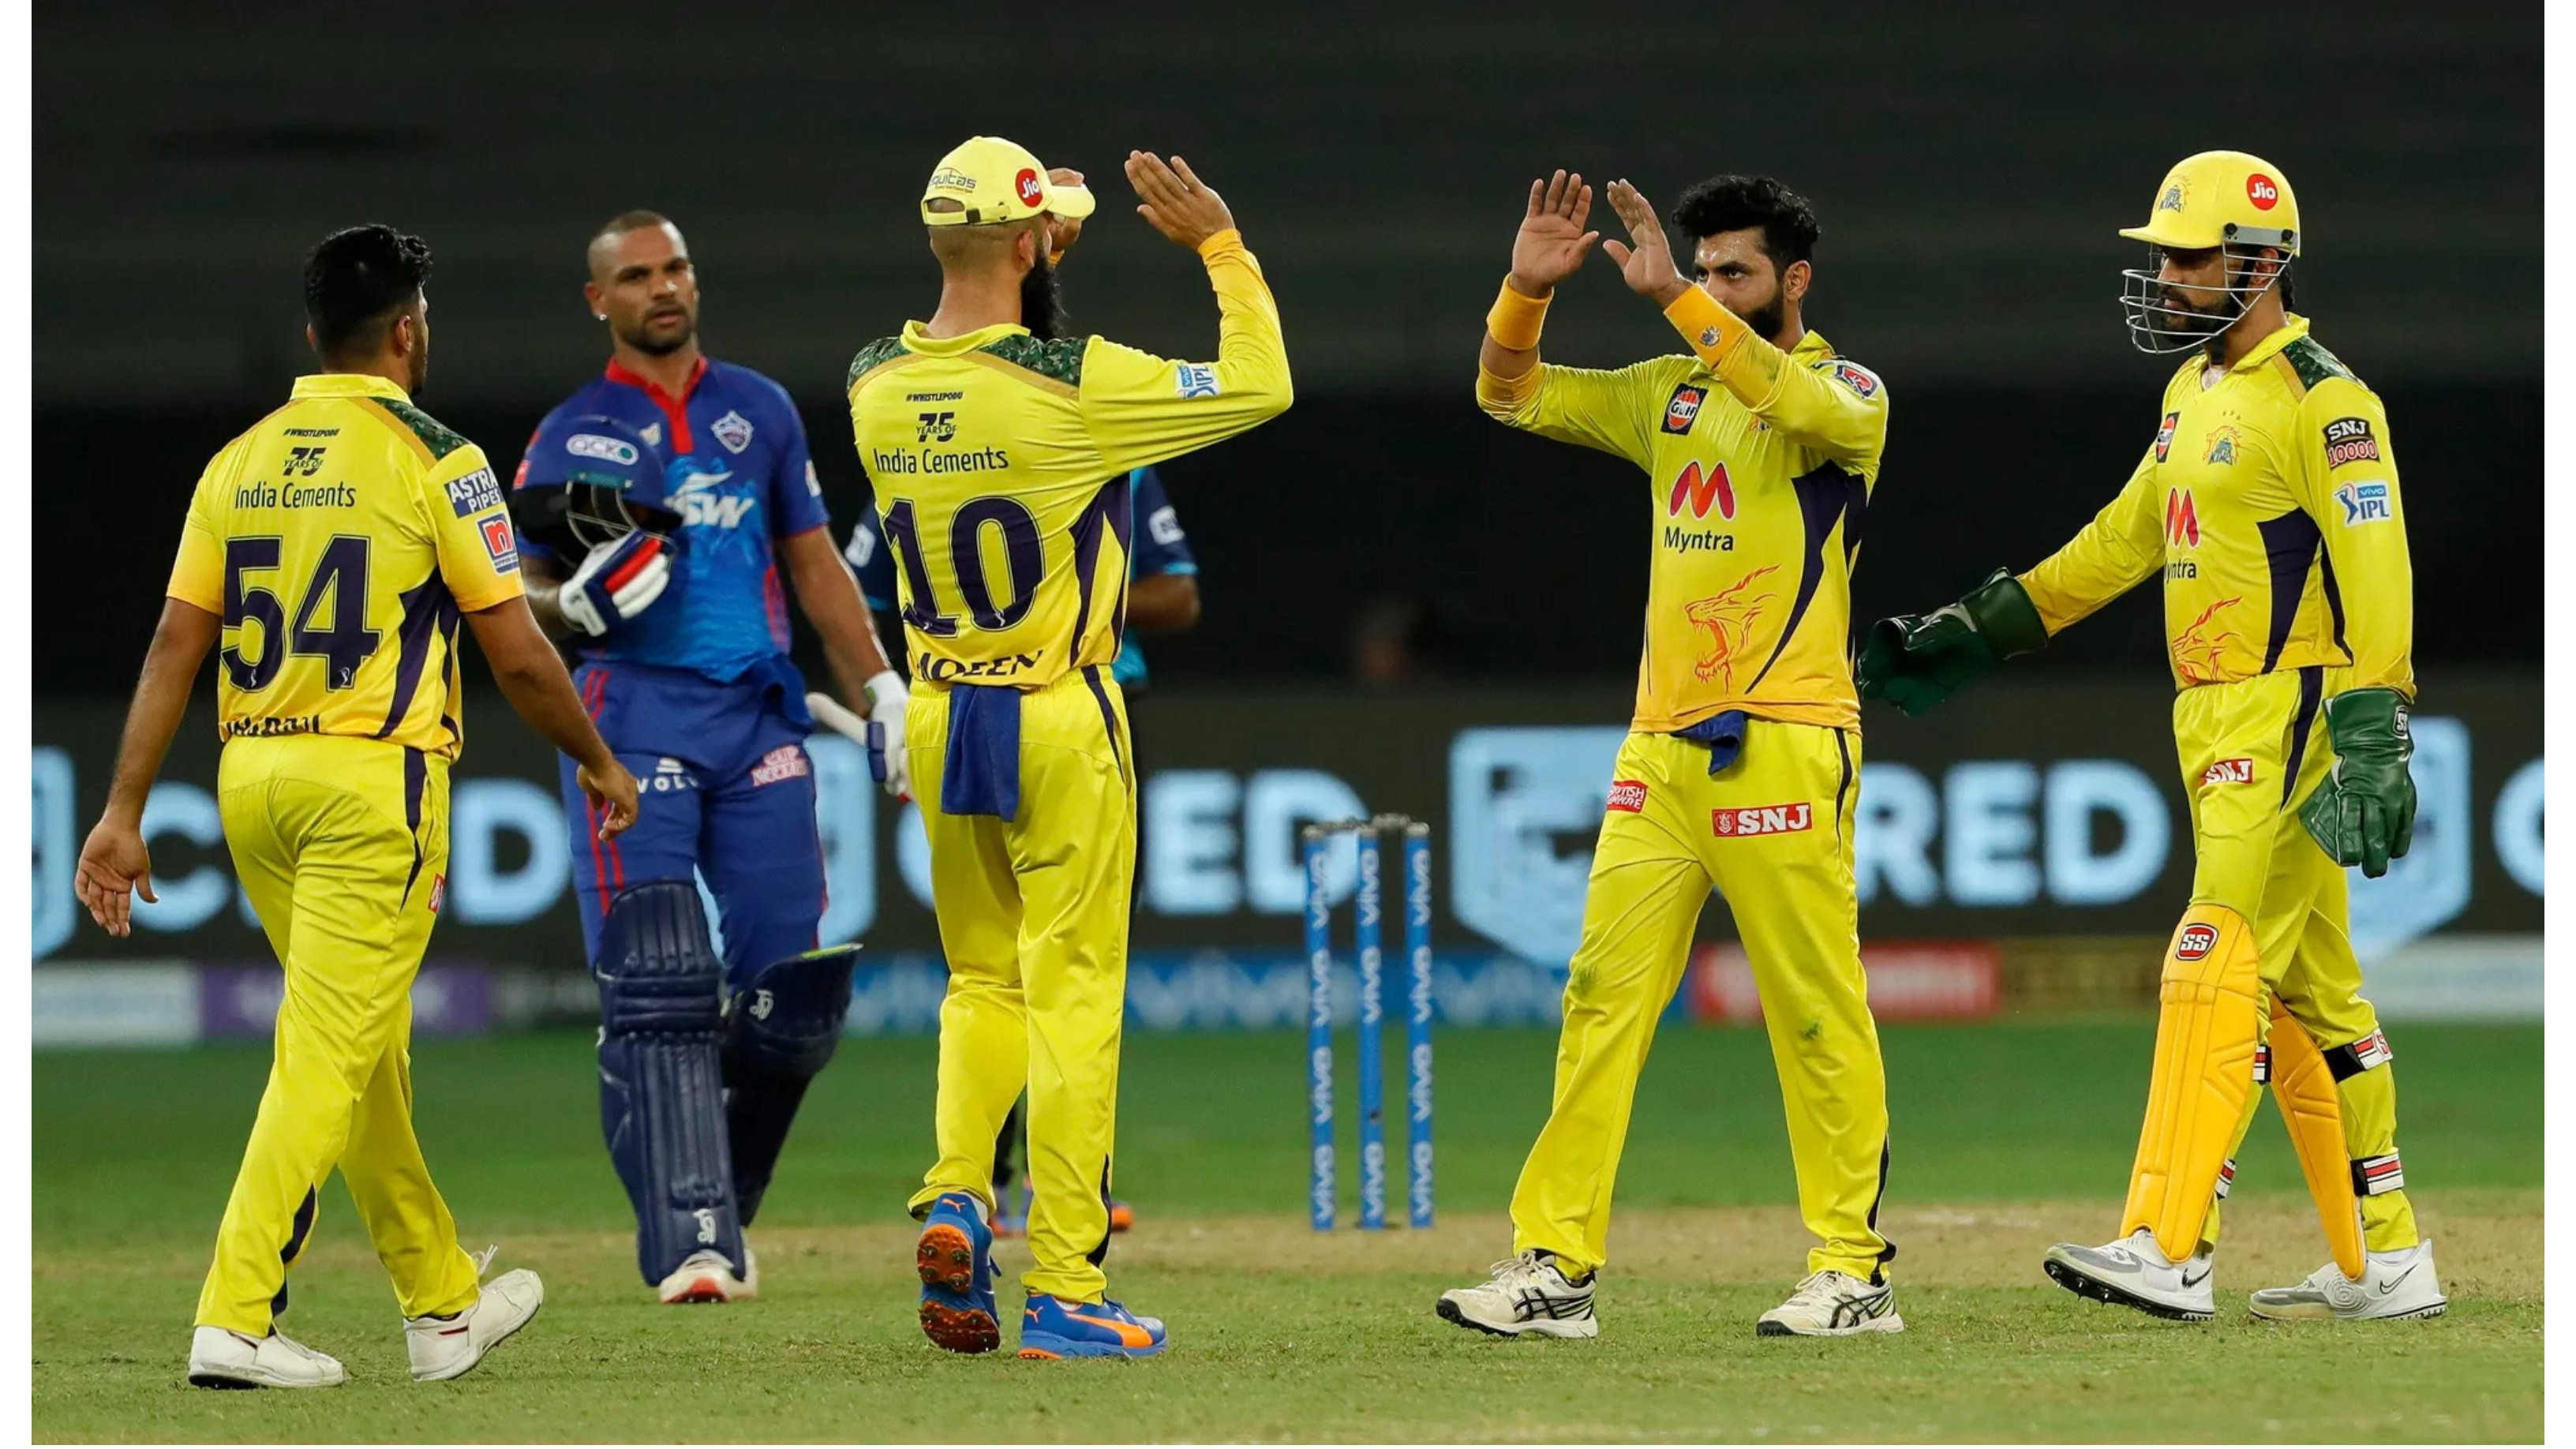 IPL 2021: ‘Very good effort to make a game out of it’, says MS Dhoni after CSK’s last over loss to DC